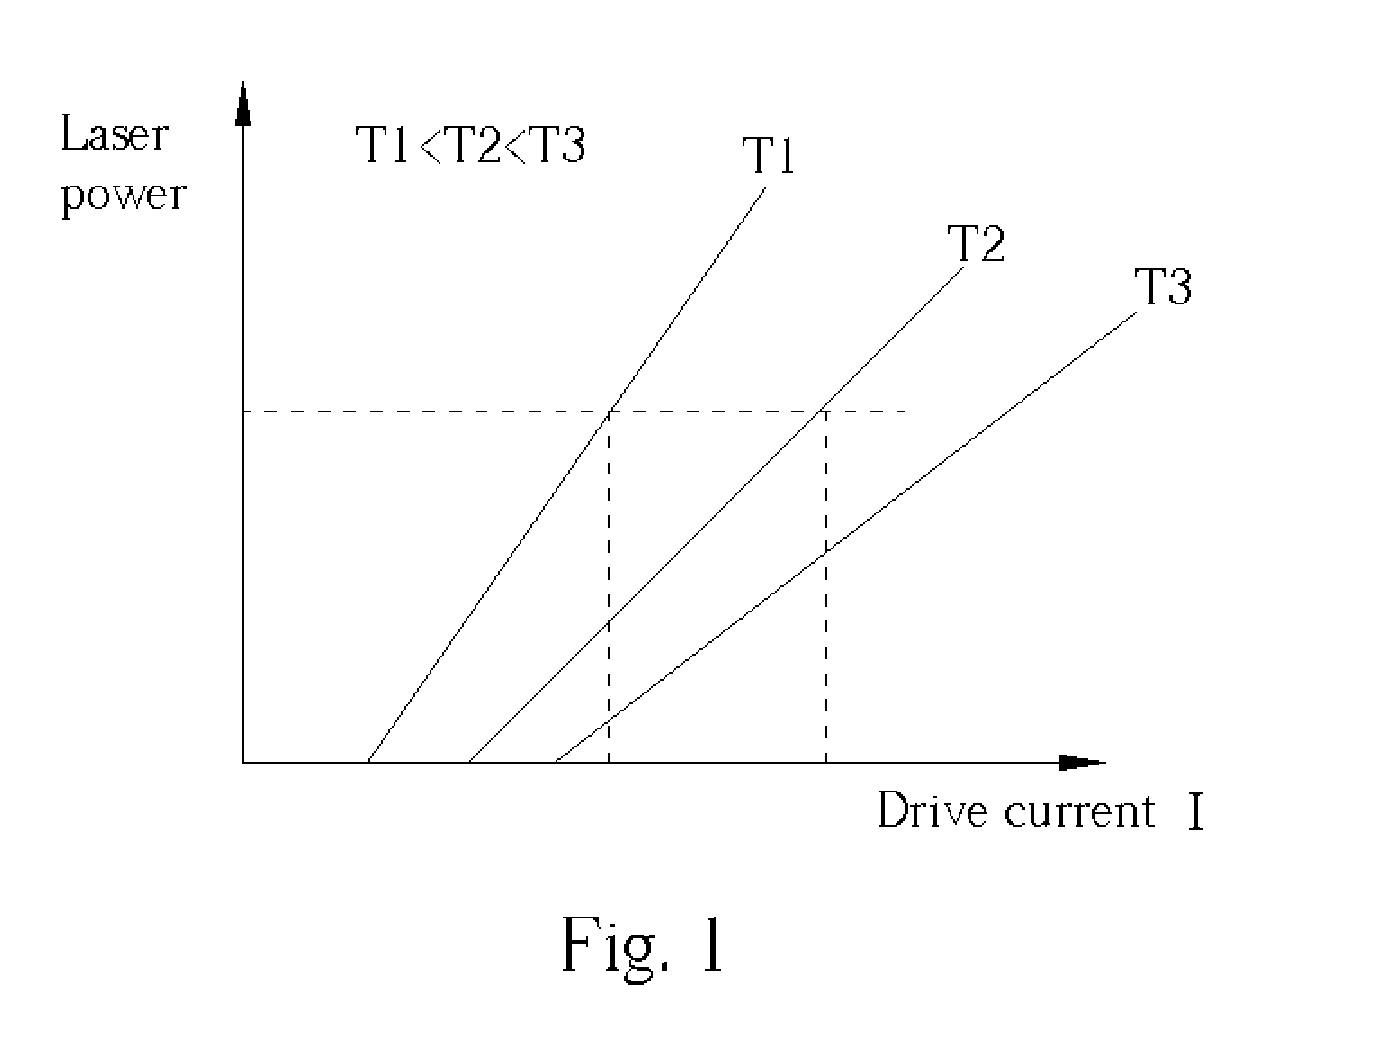 Apparatus and method for laser power control